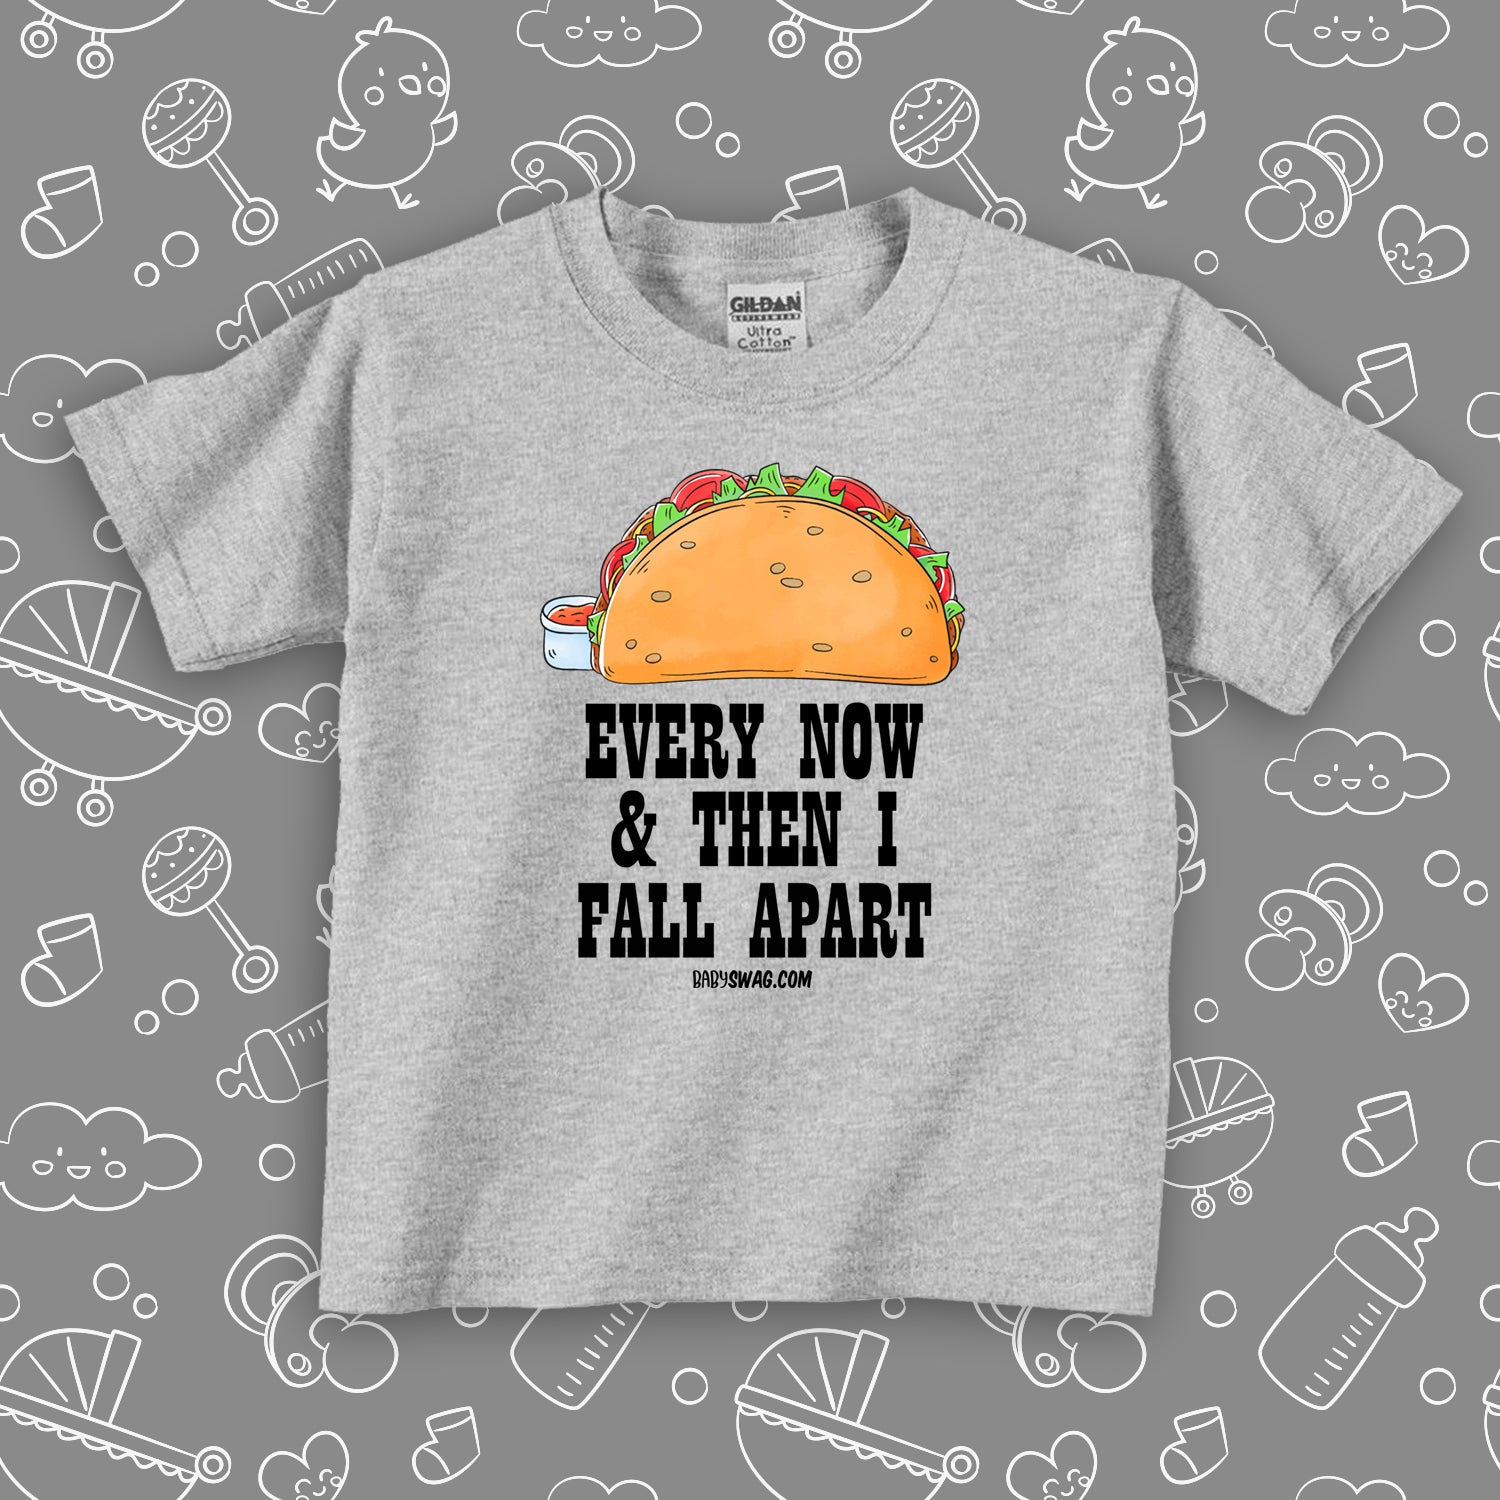 Funny toddler shirt with taco image and print: "Every now and then I fall apart", color grey.